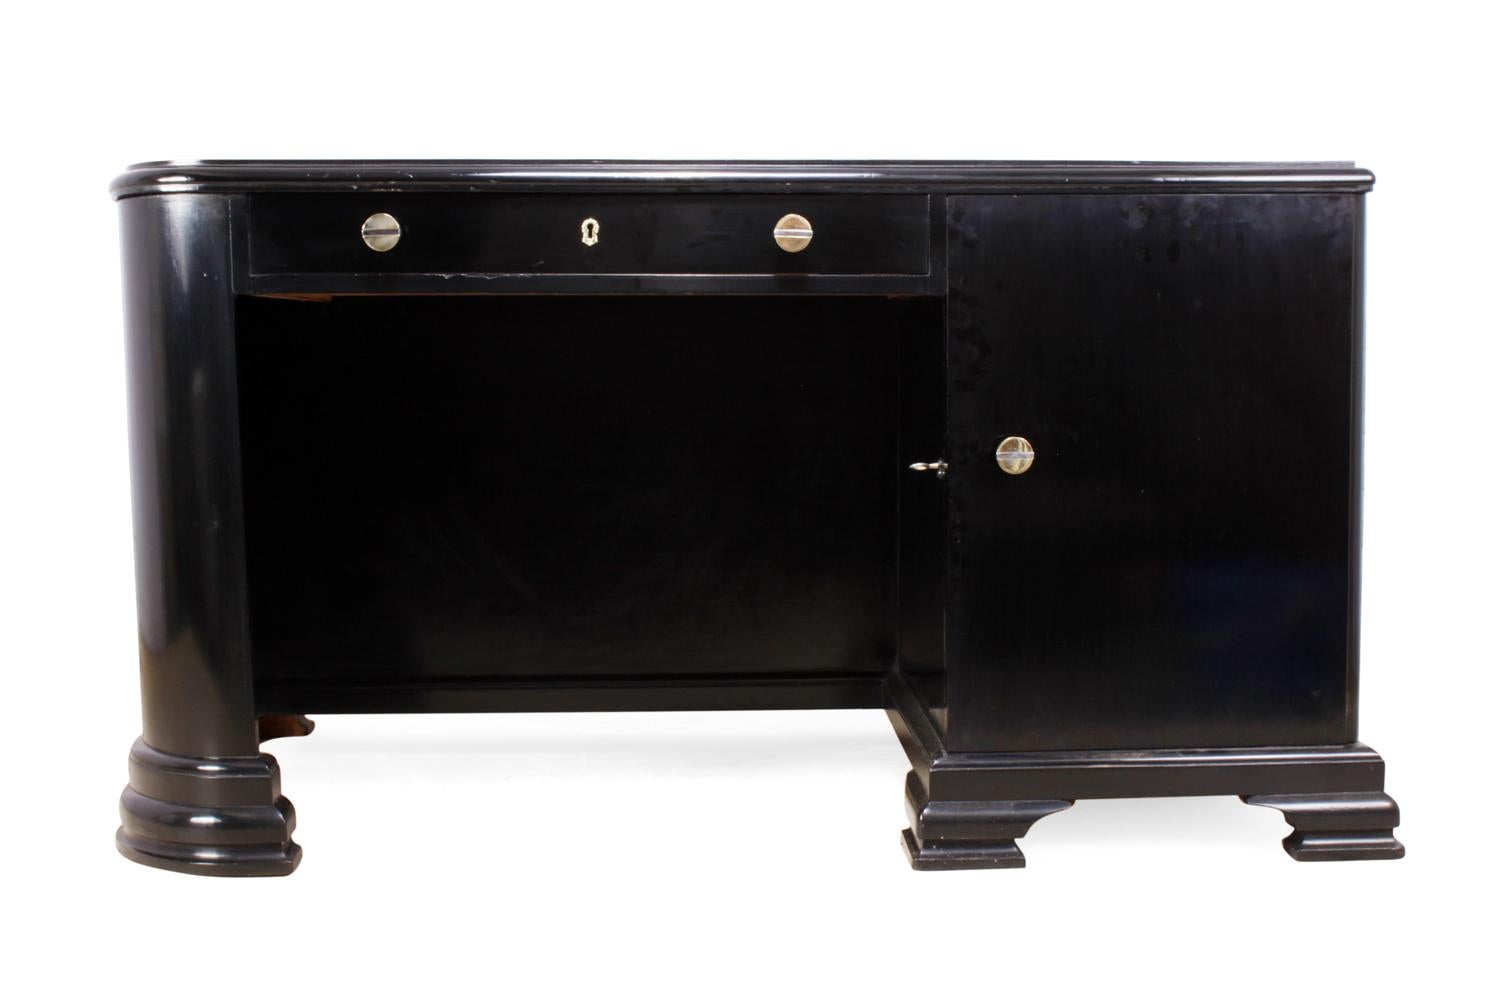 French Art Deco black desk
This French desk was produced in the 1930s, it has a new leather inset top, lockable door with drawers behind and top drawer, the desk is free standing with a bookshelf to the rear and is in excellent condition having